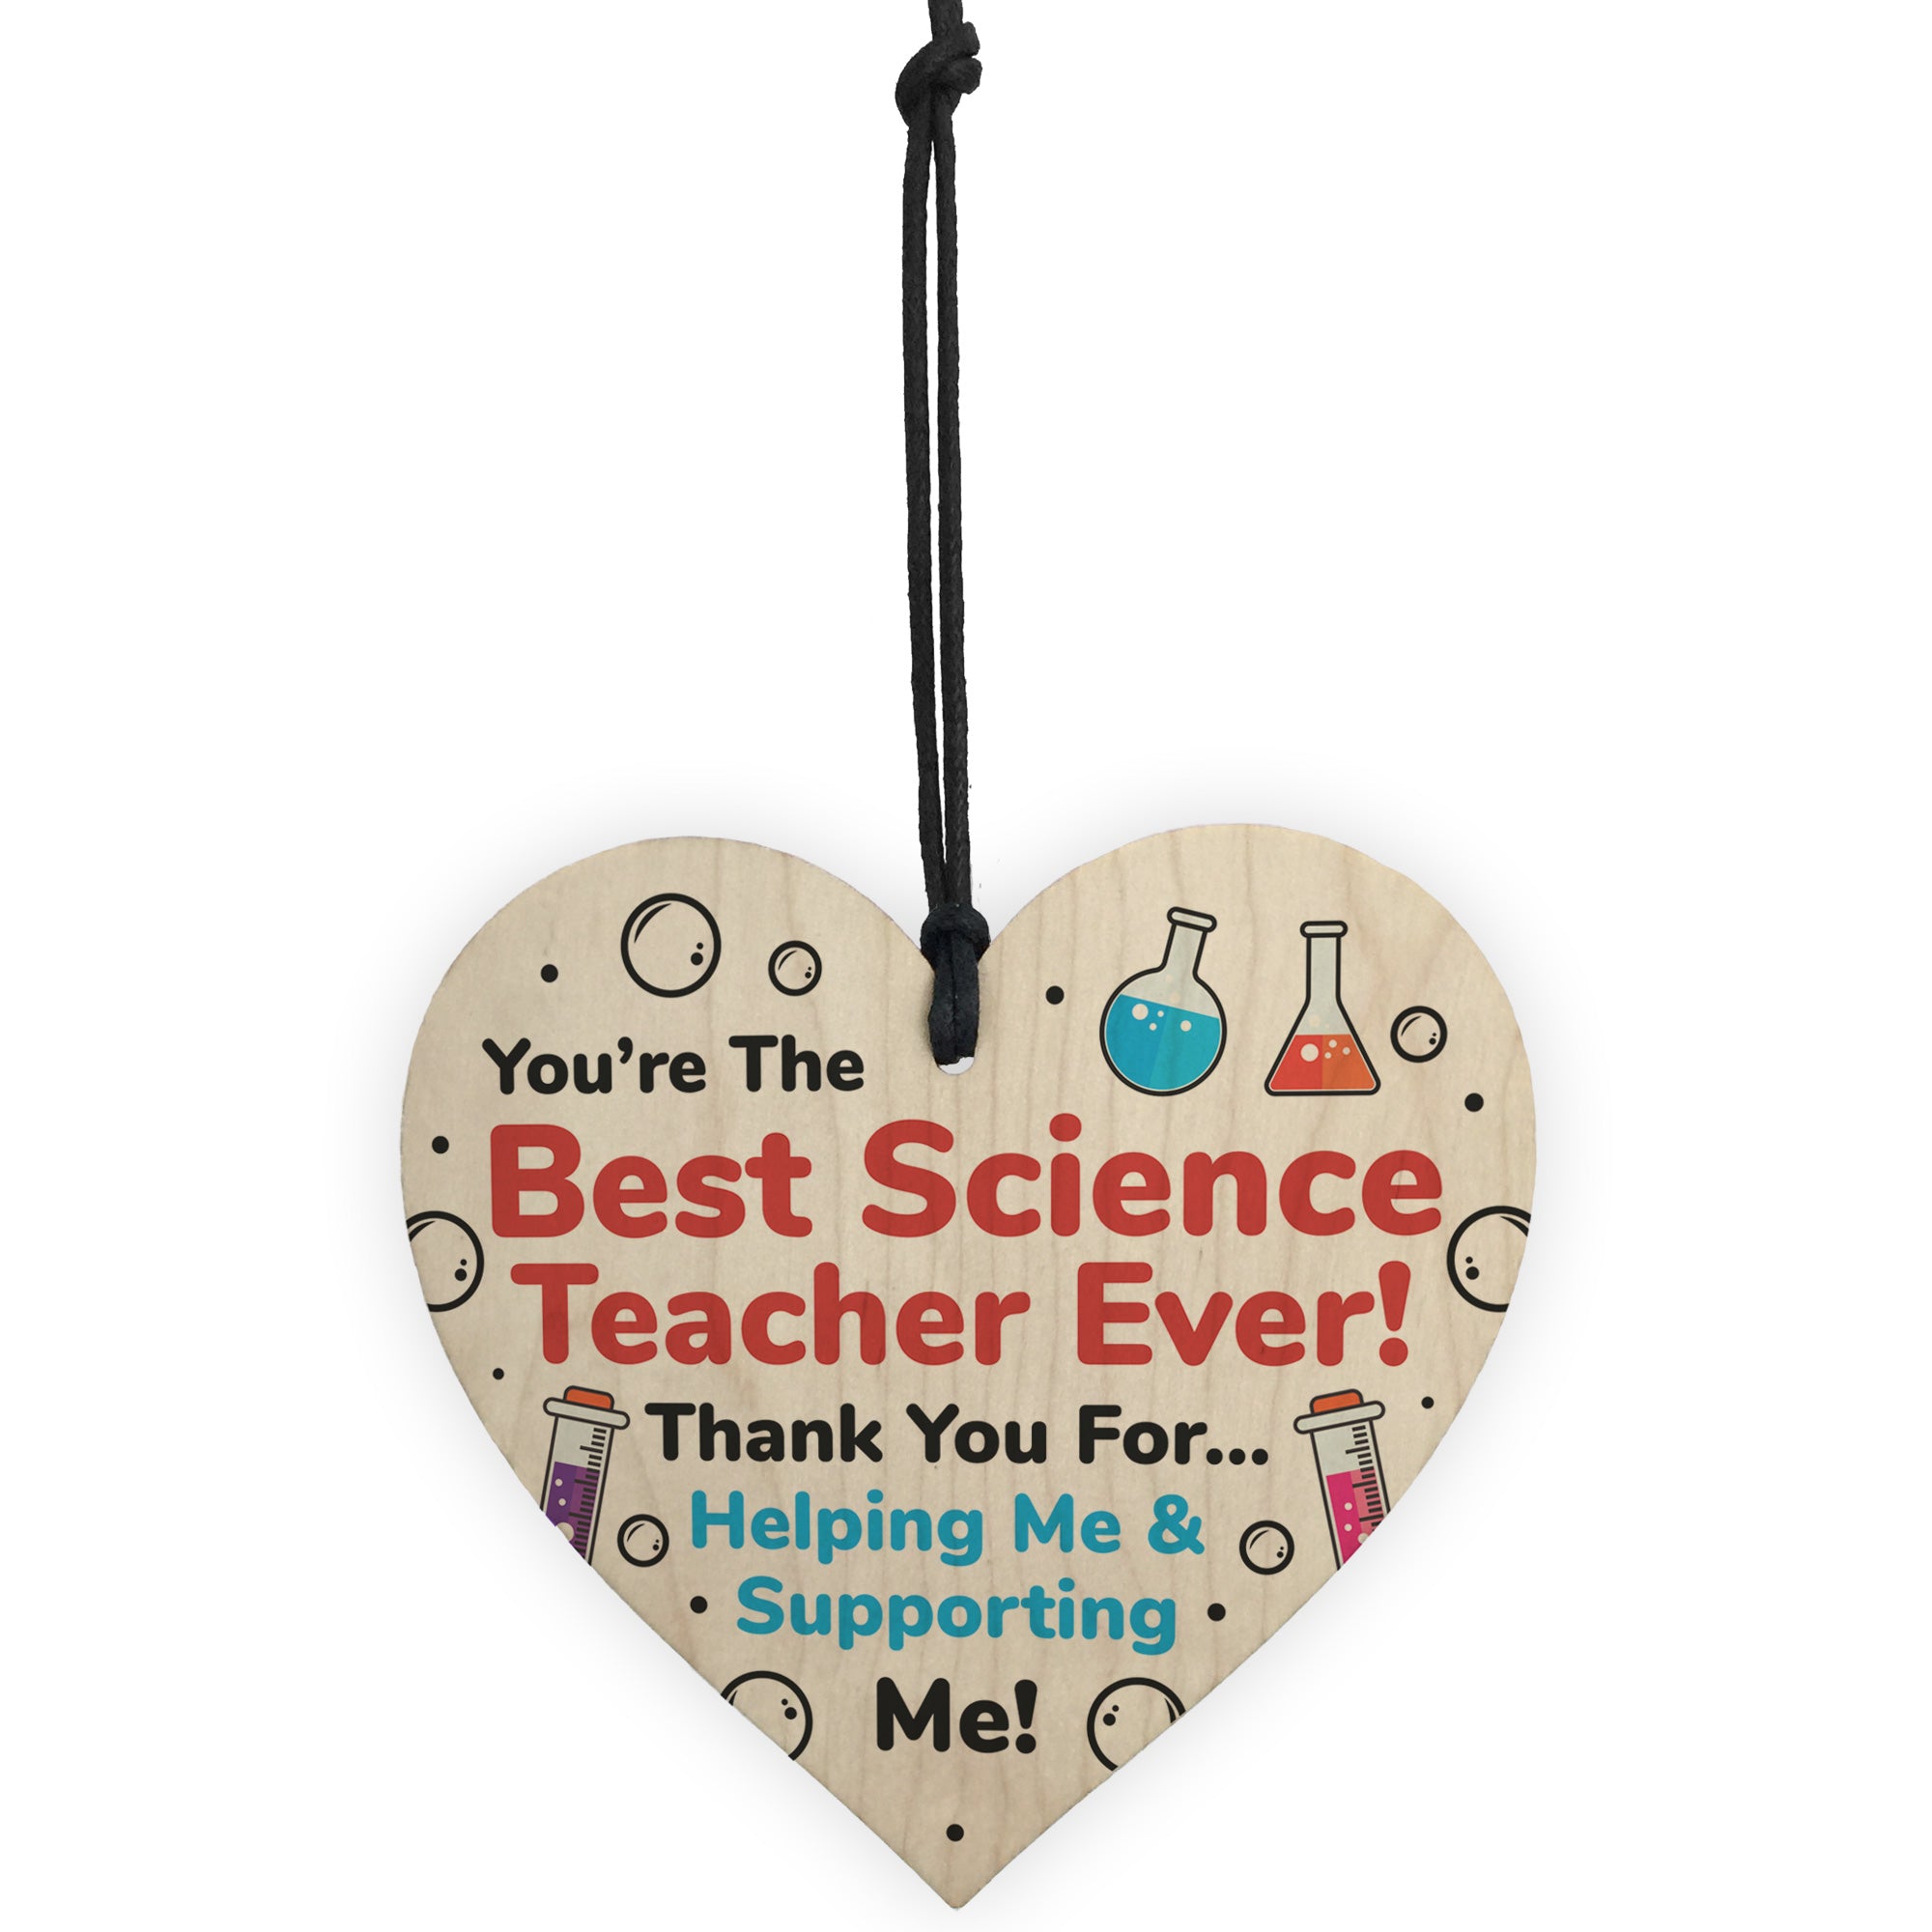 Best Science Kits For Kids 2024 - Forbes Vetted